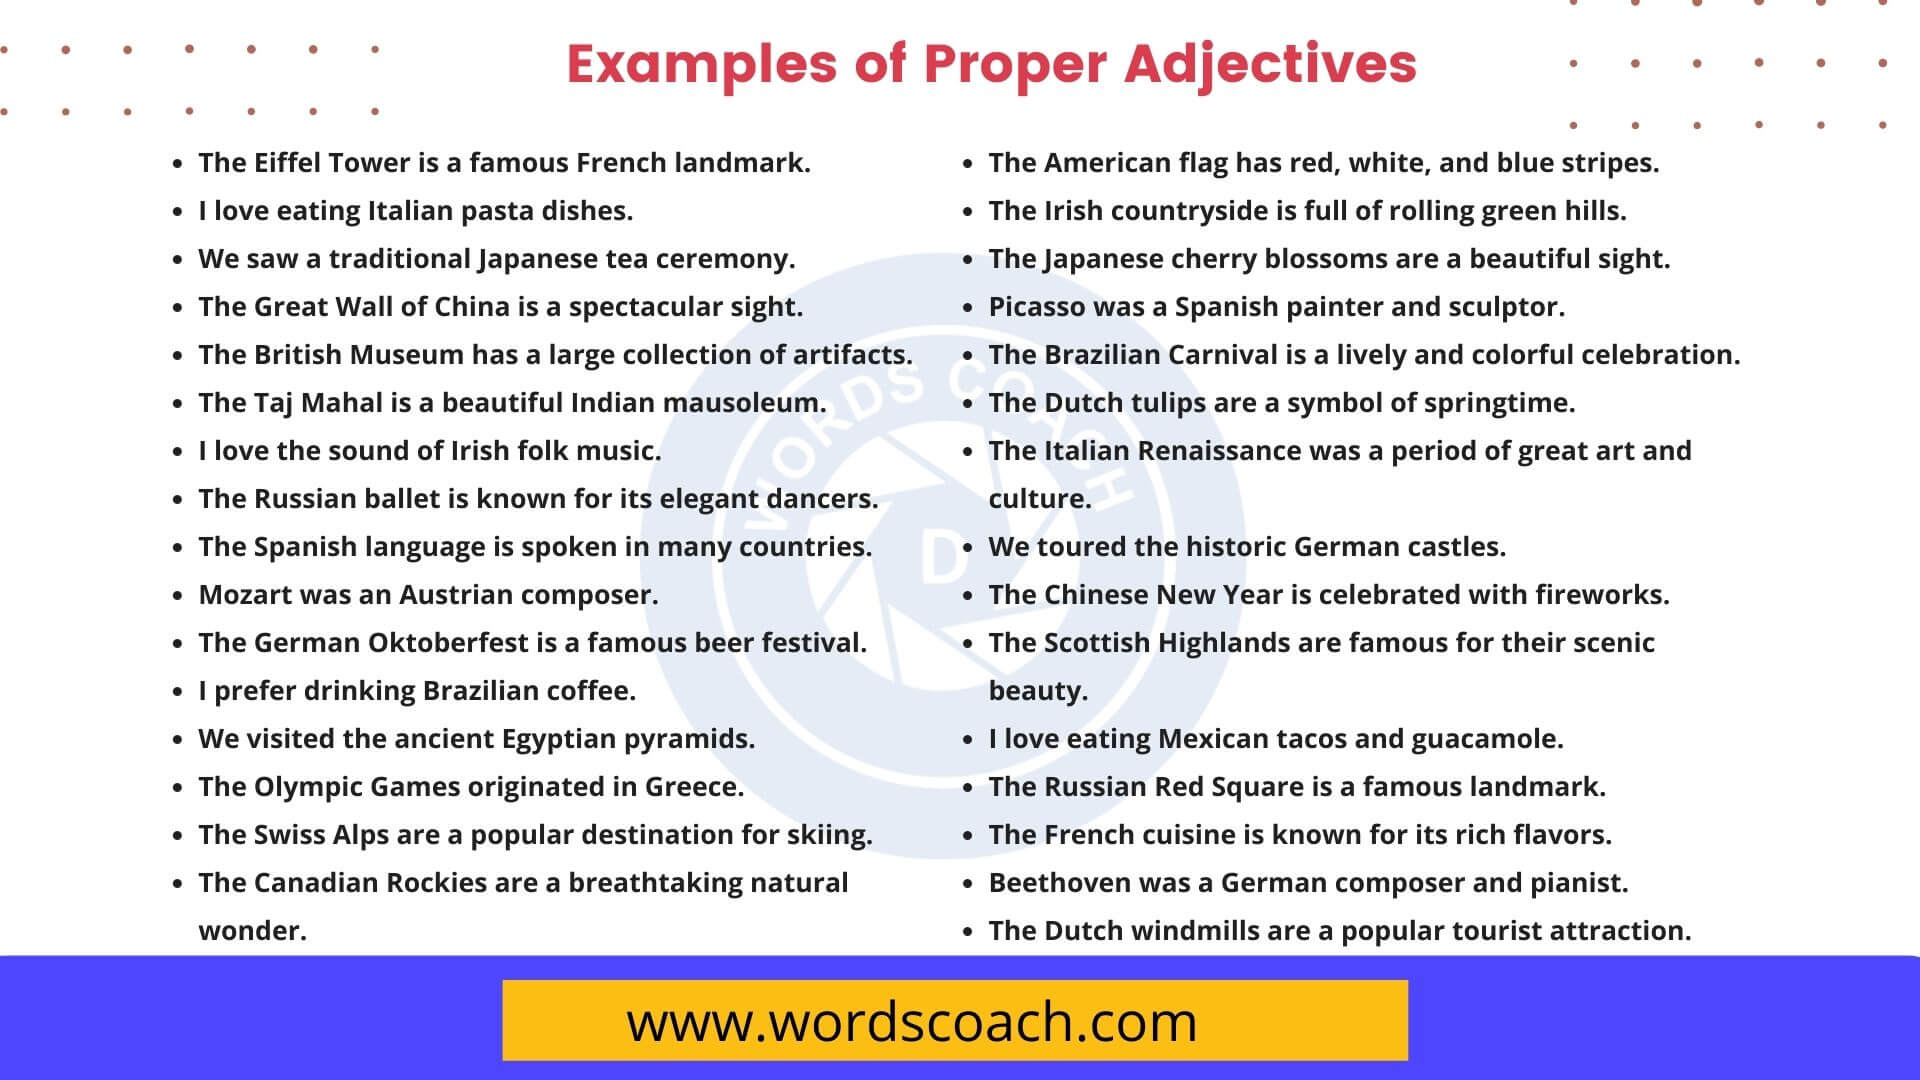 100-examples-of-proper-adjectives-word-coach